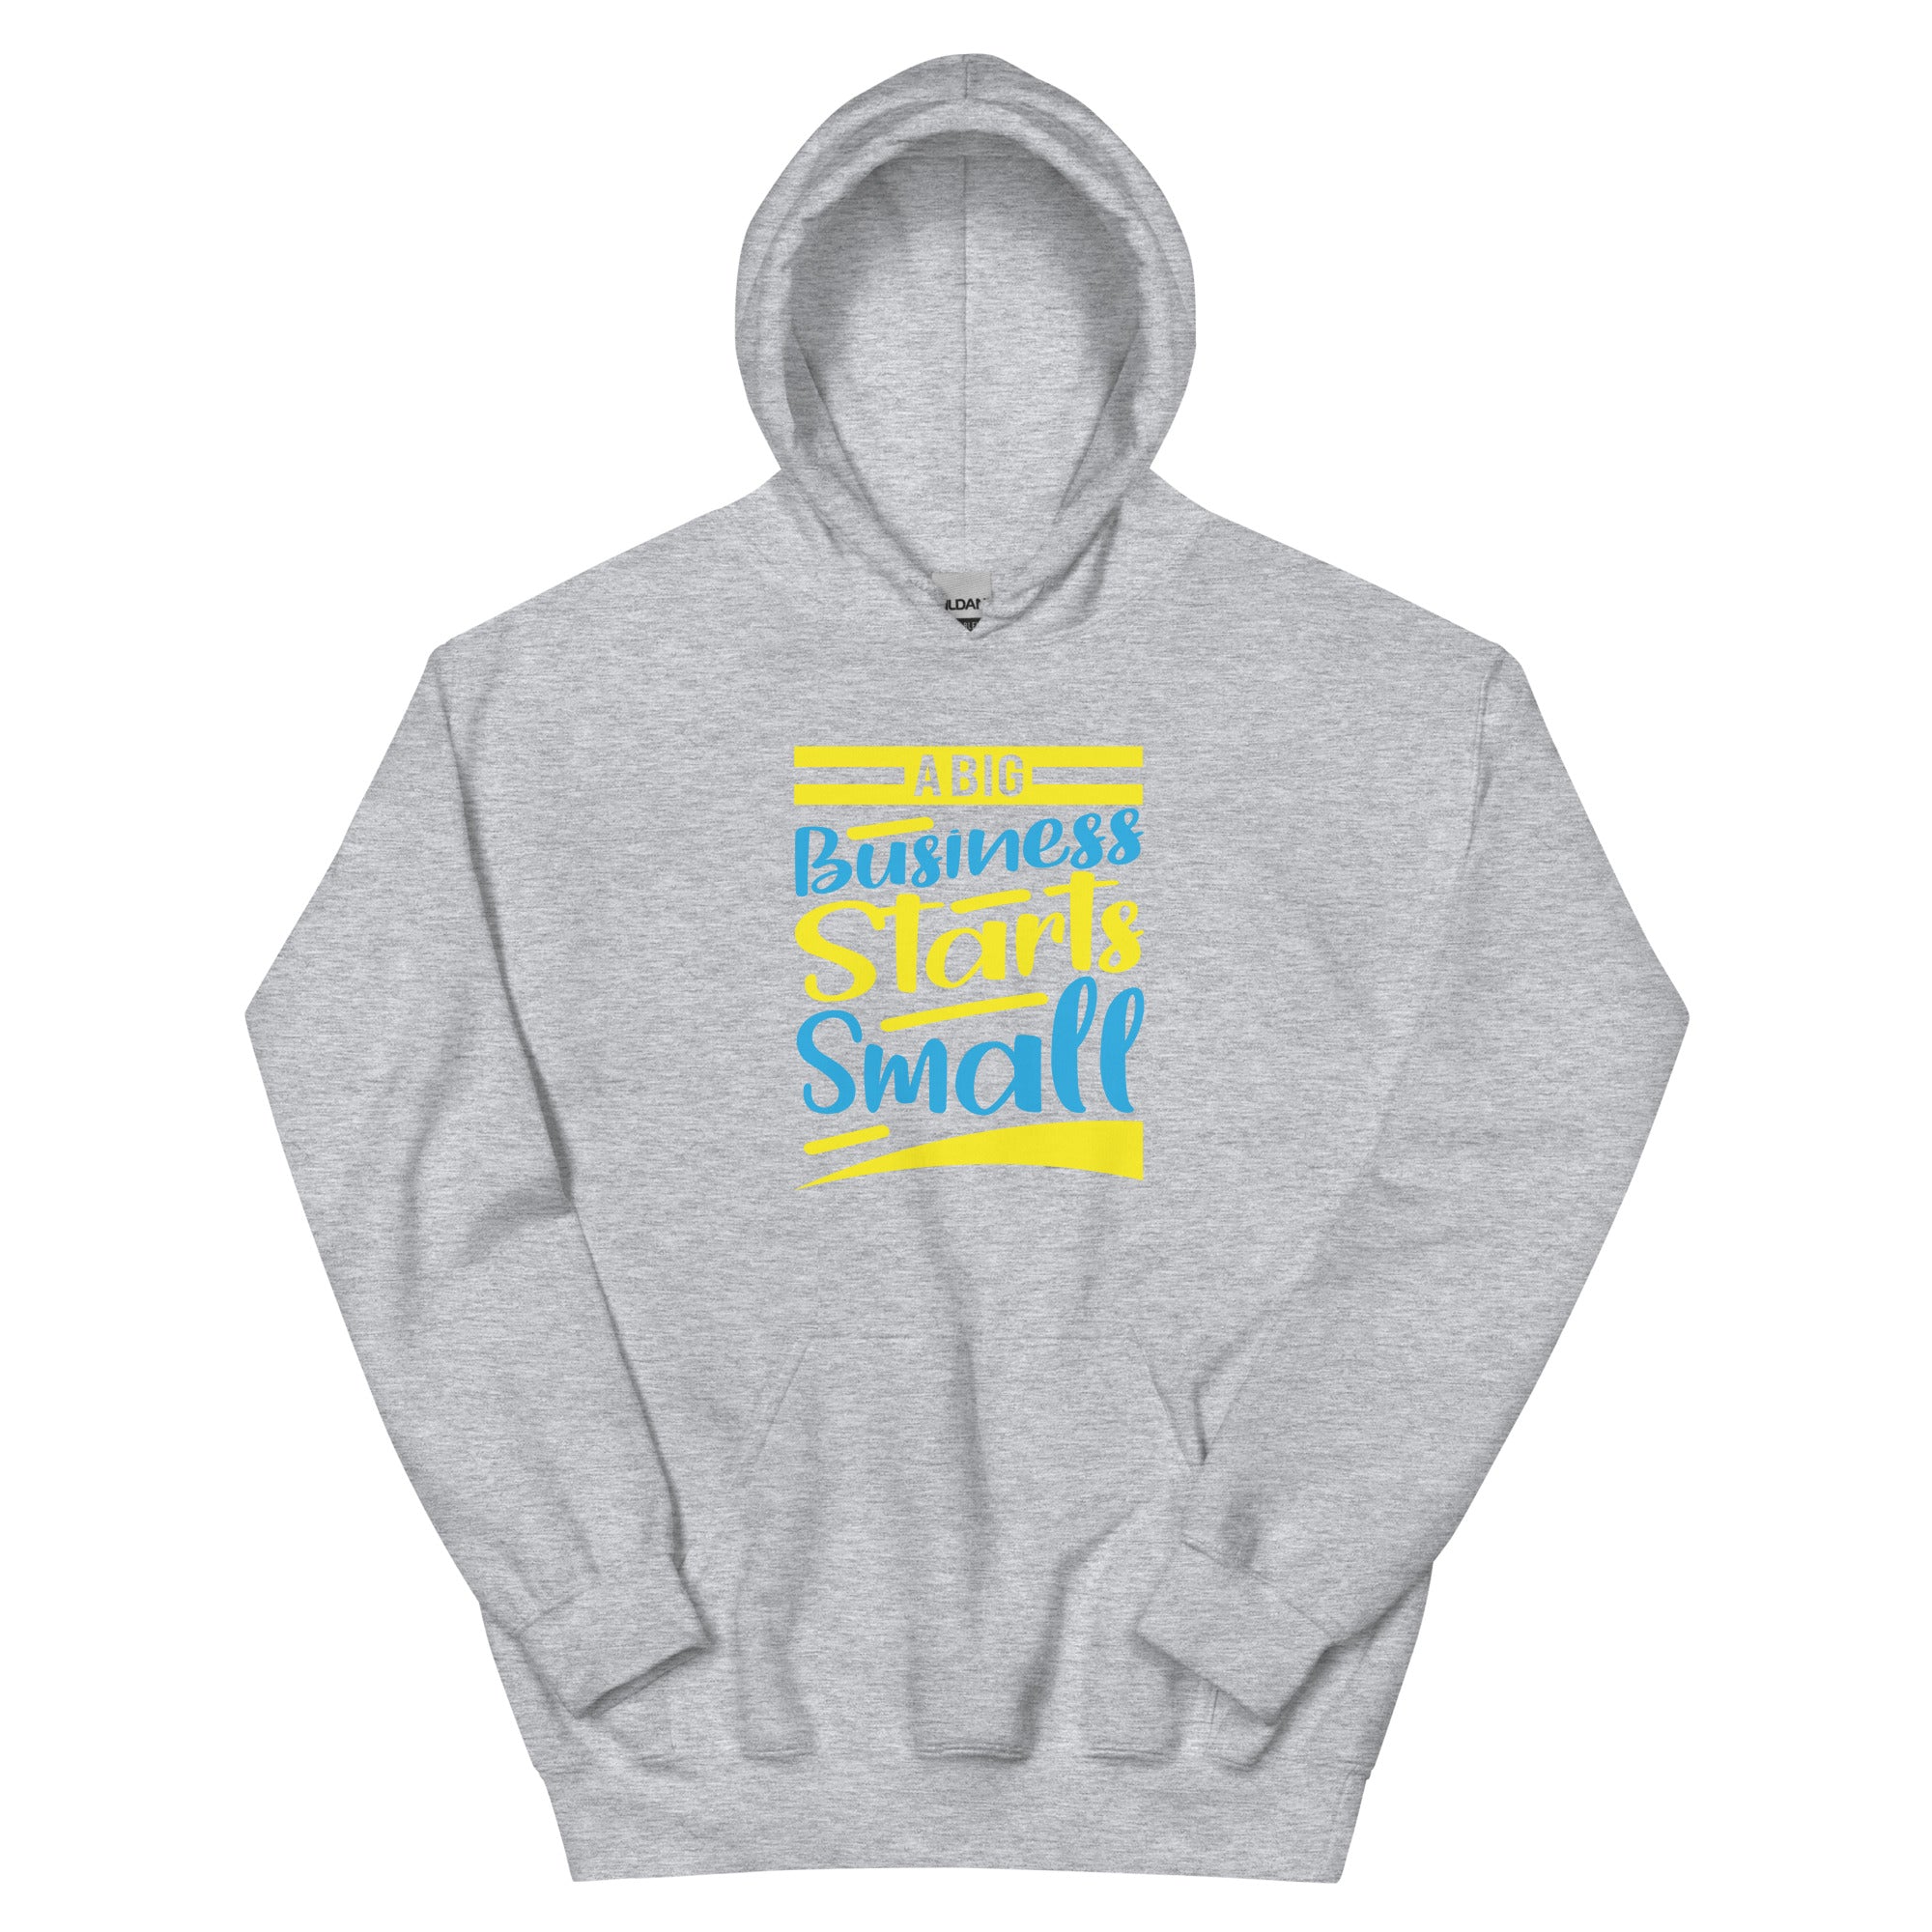 A Big Business Starts Small - Unisex Hoodie